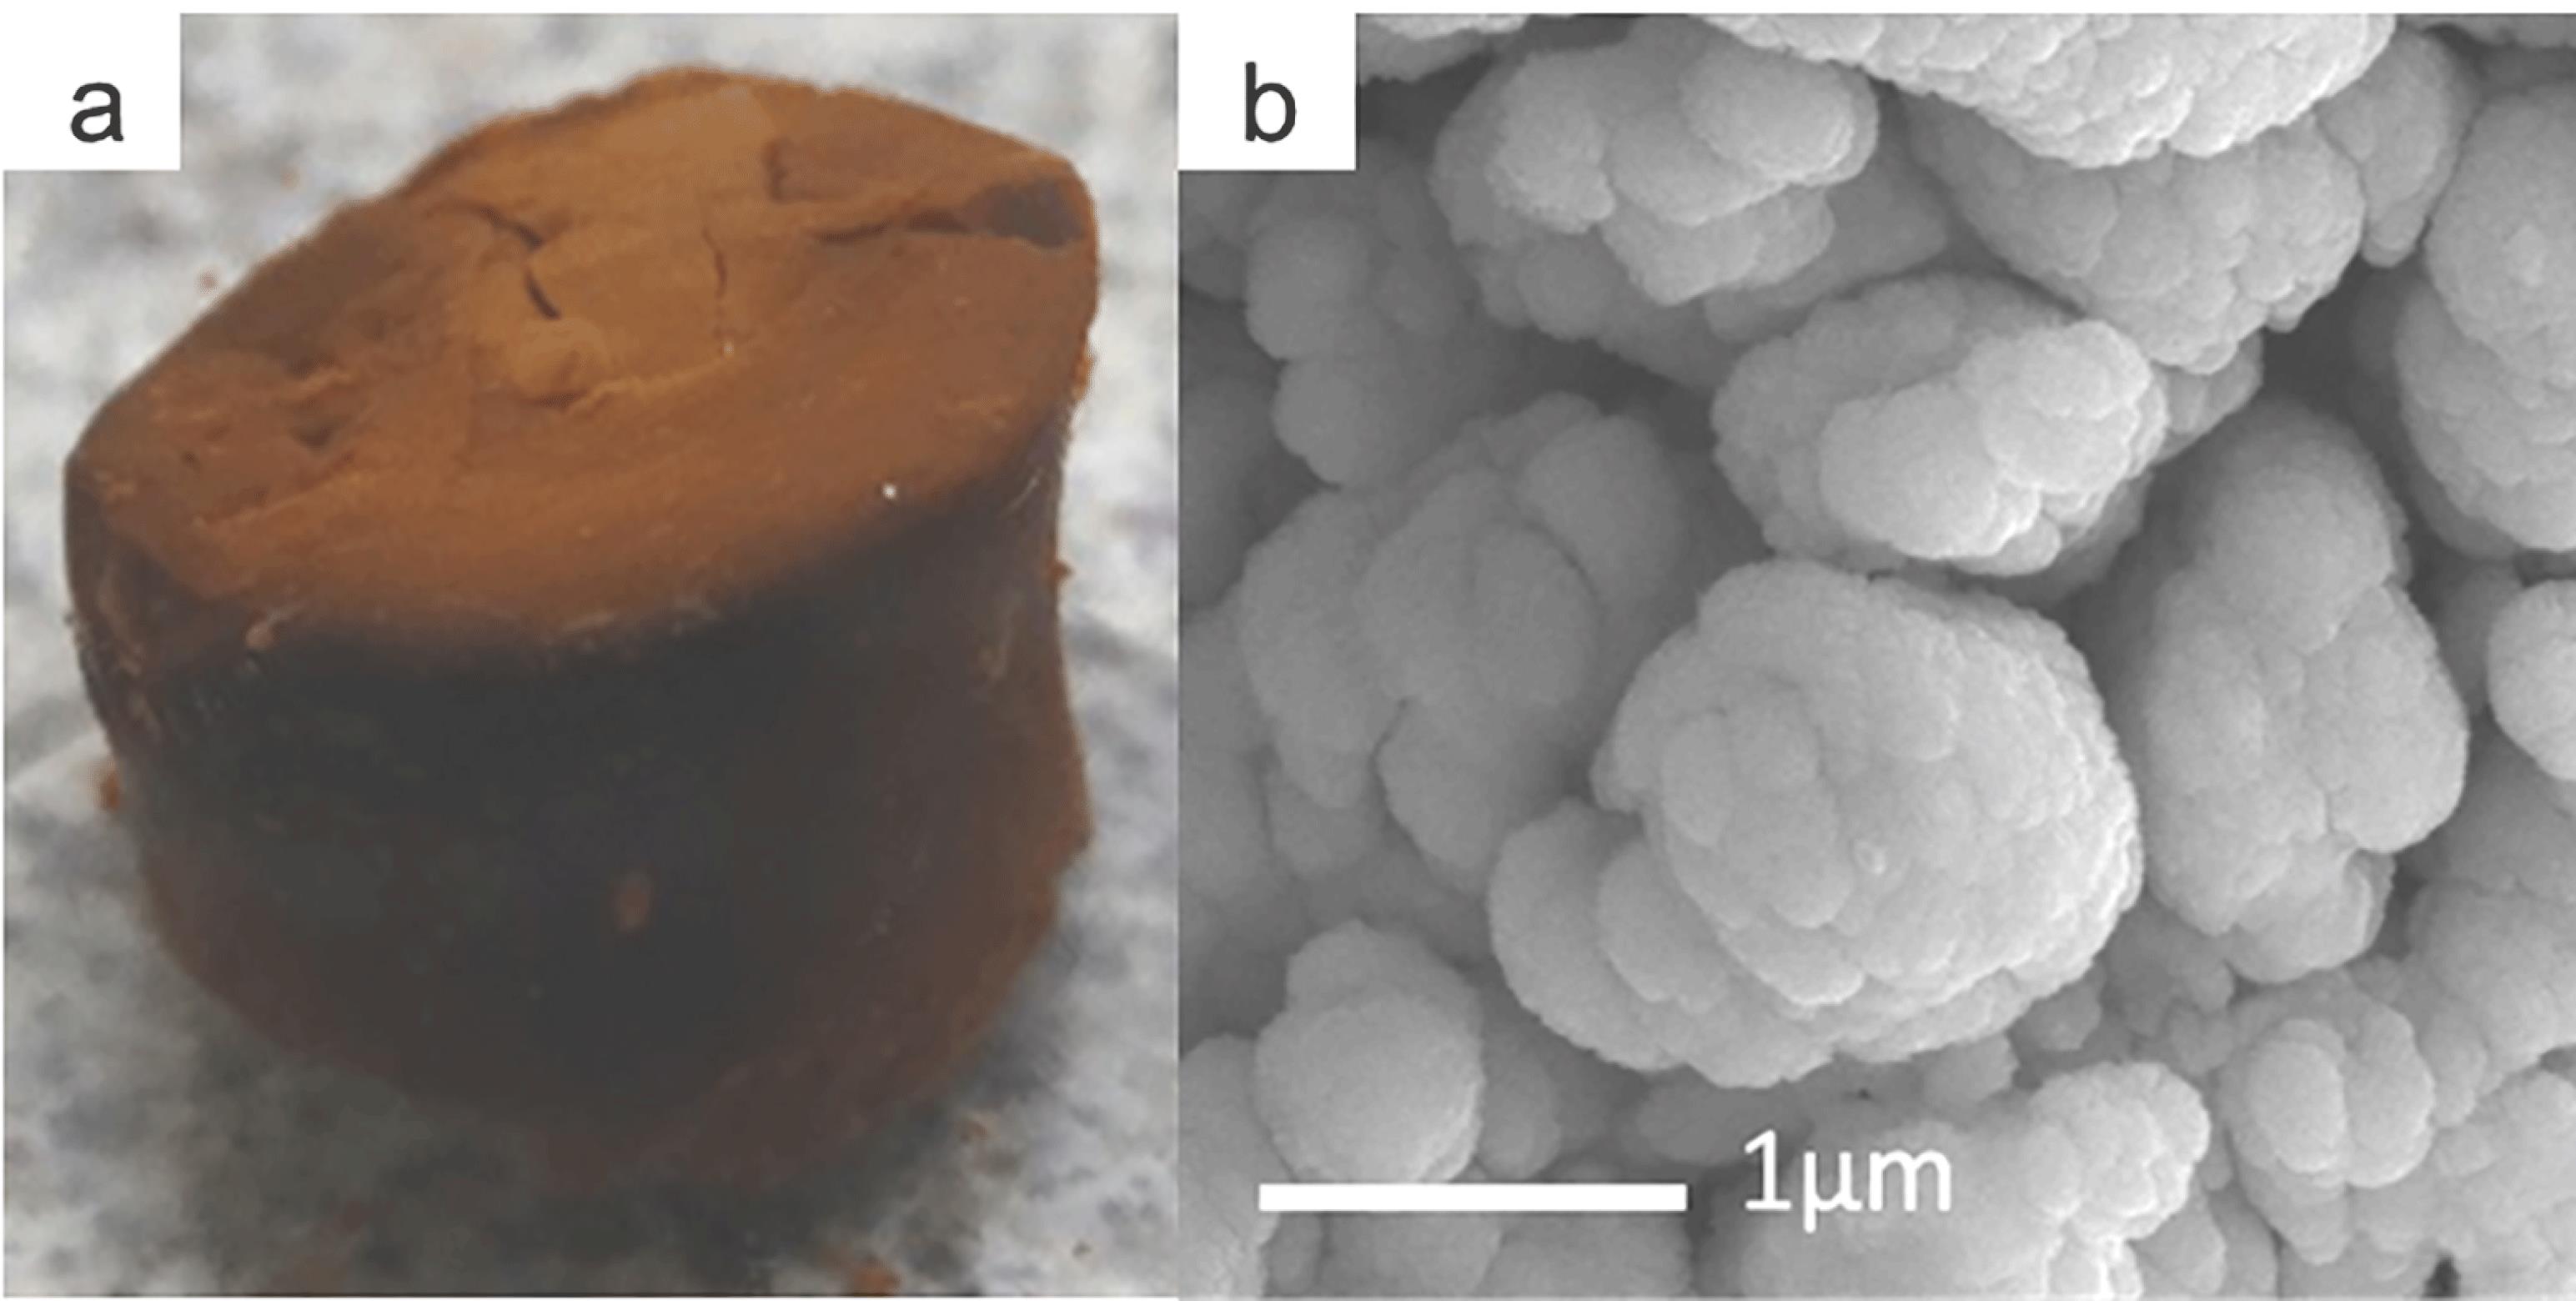 Fe (III)-based aerogel synthesized using PO (a) monolith, (b) SEM showing the larger clusters are made up of nanoparticles in the 70–100 nm range.